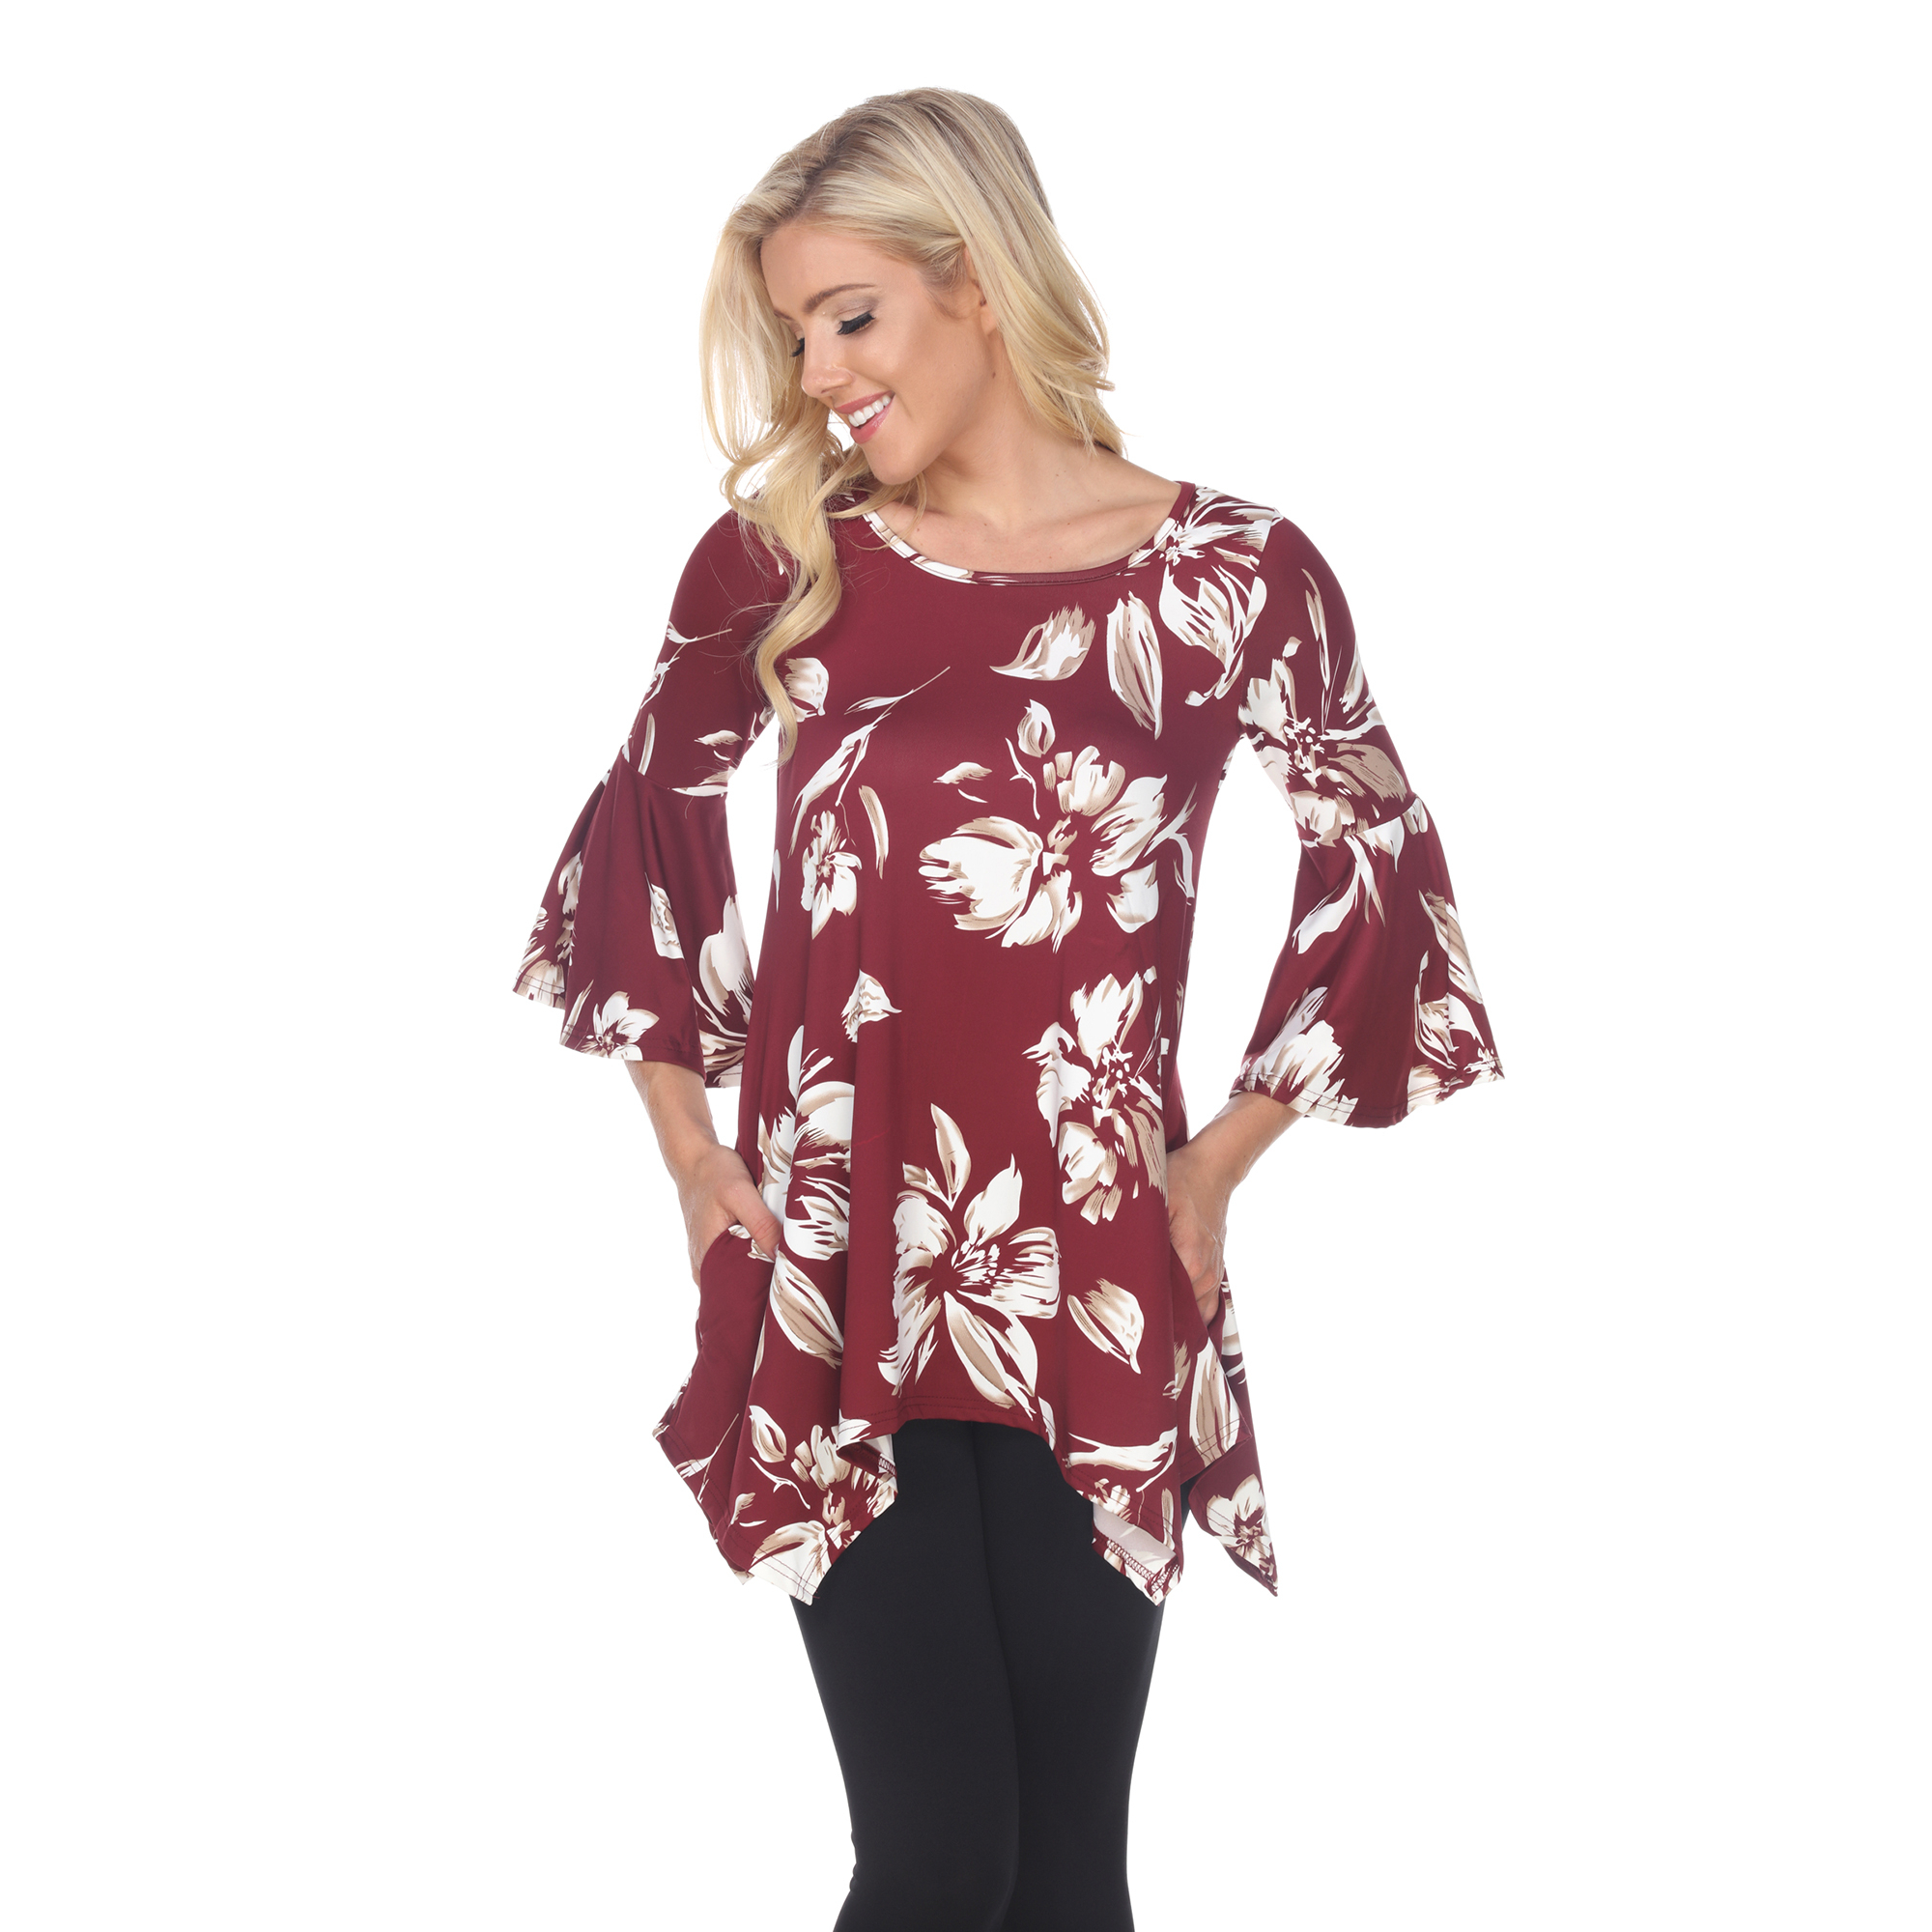 White Mark Women's Floral Print Quarter Sleeve Tunic Top With Pockets - Red, 2X